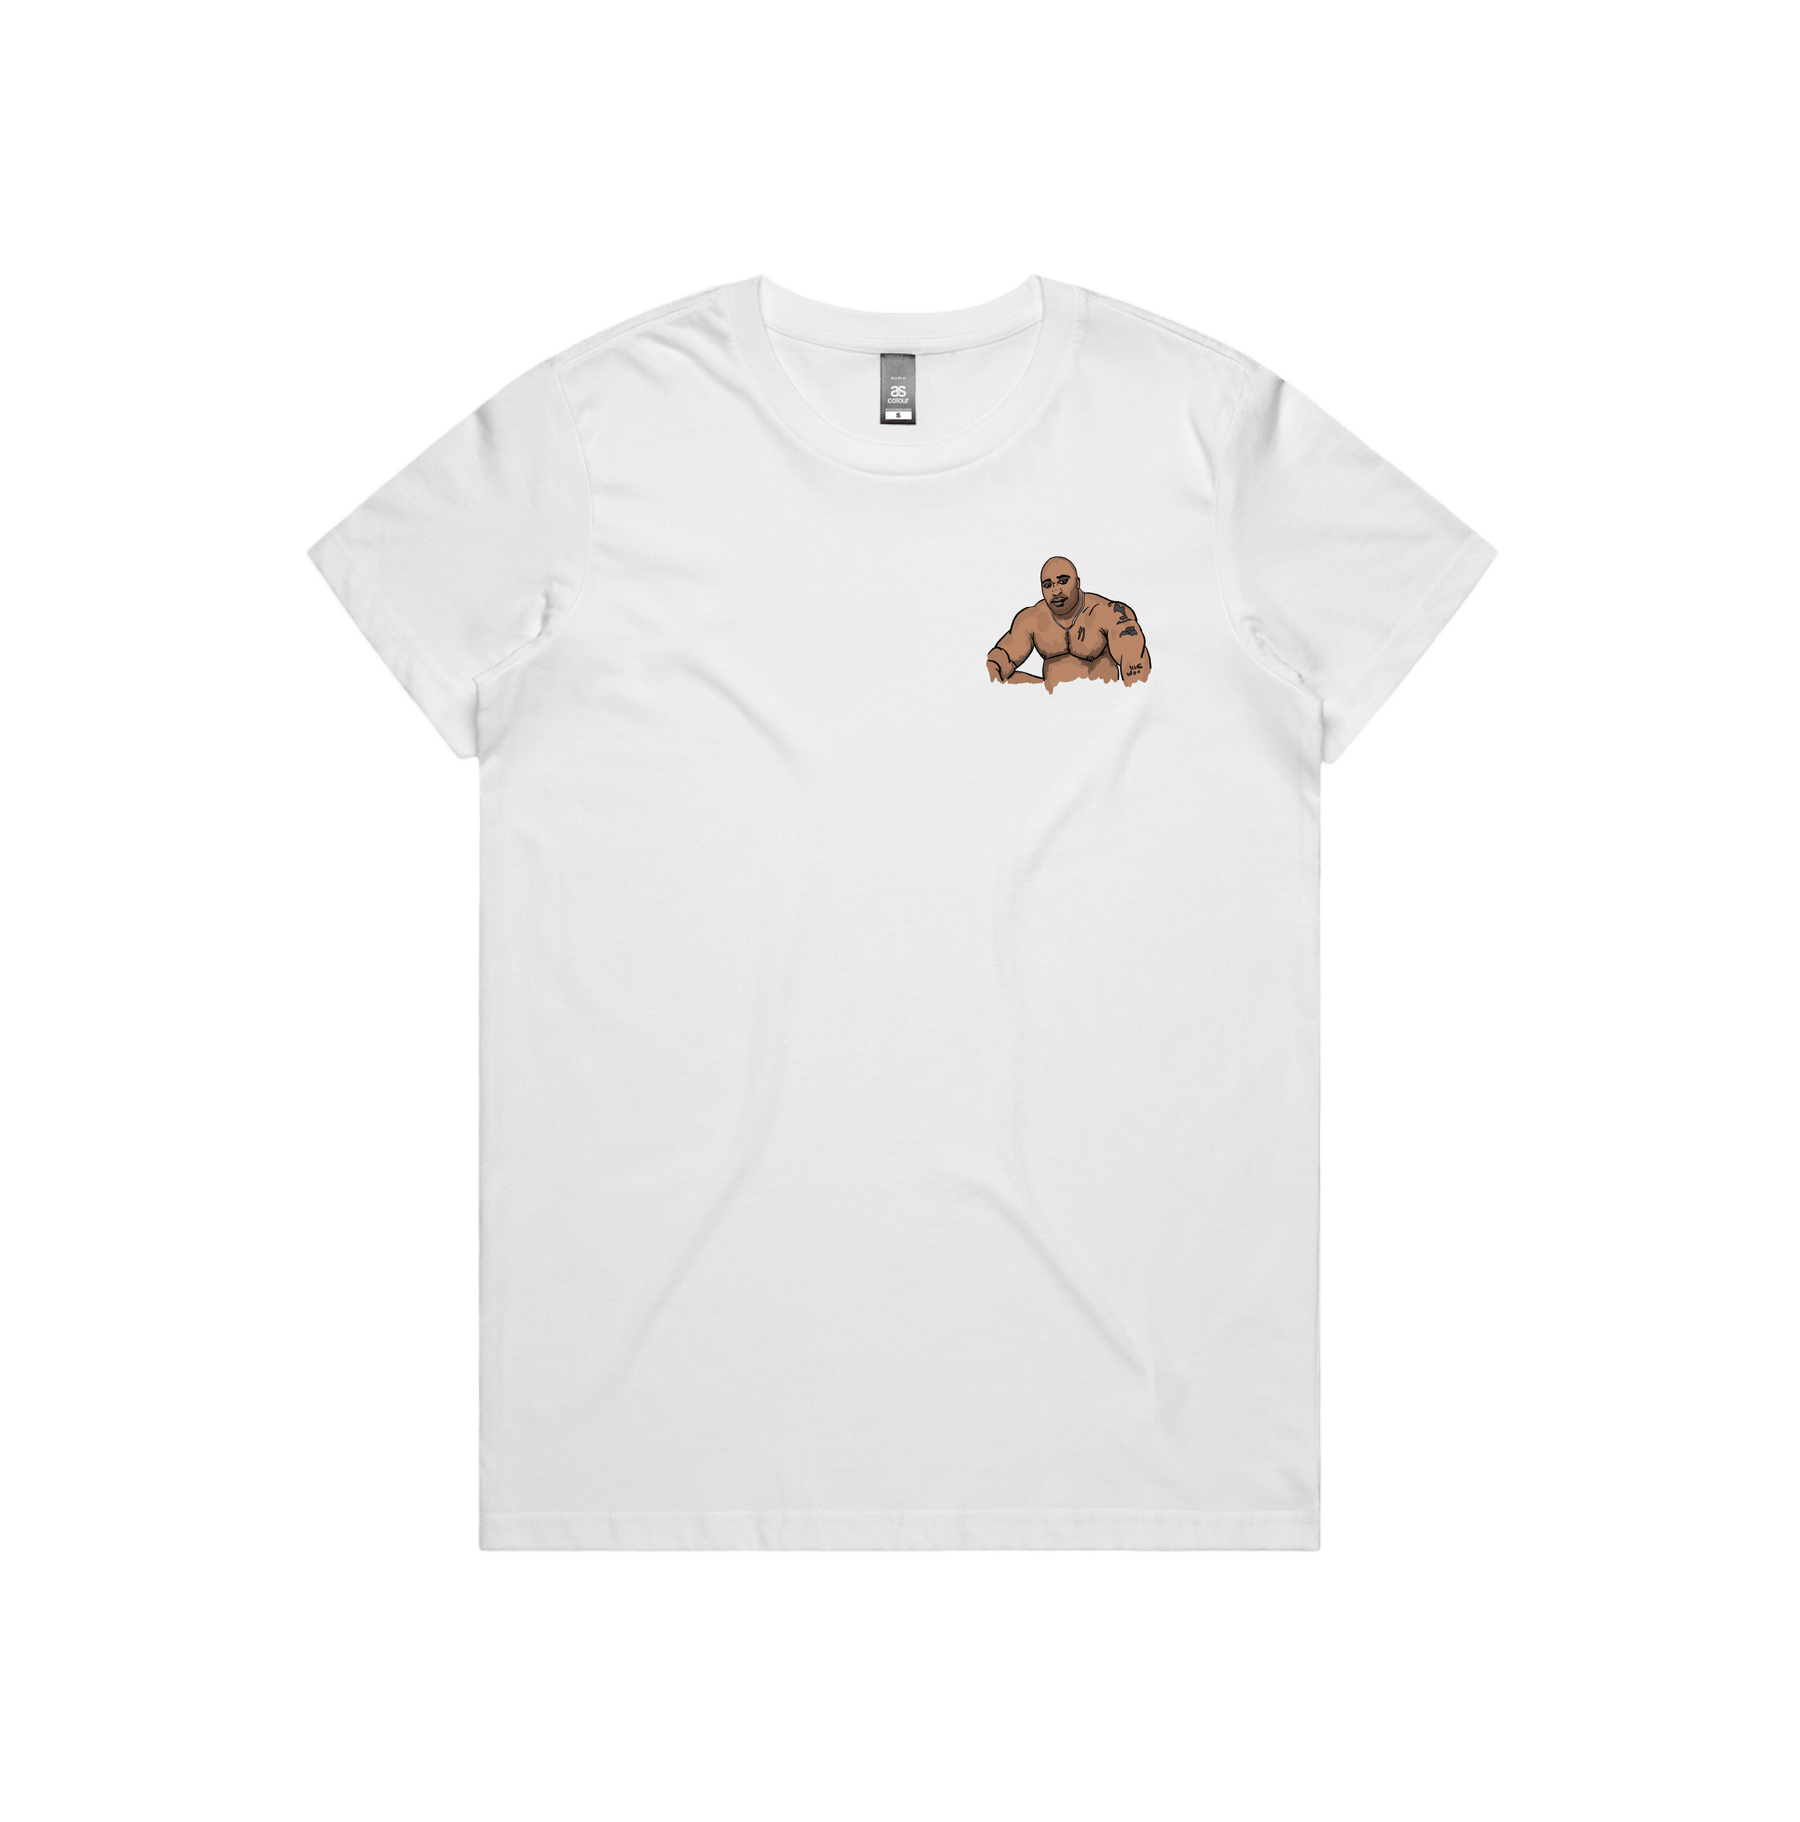 XS / White / Small Front Design Big Barry 🍆 - Women's T Shirt